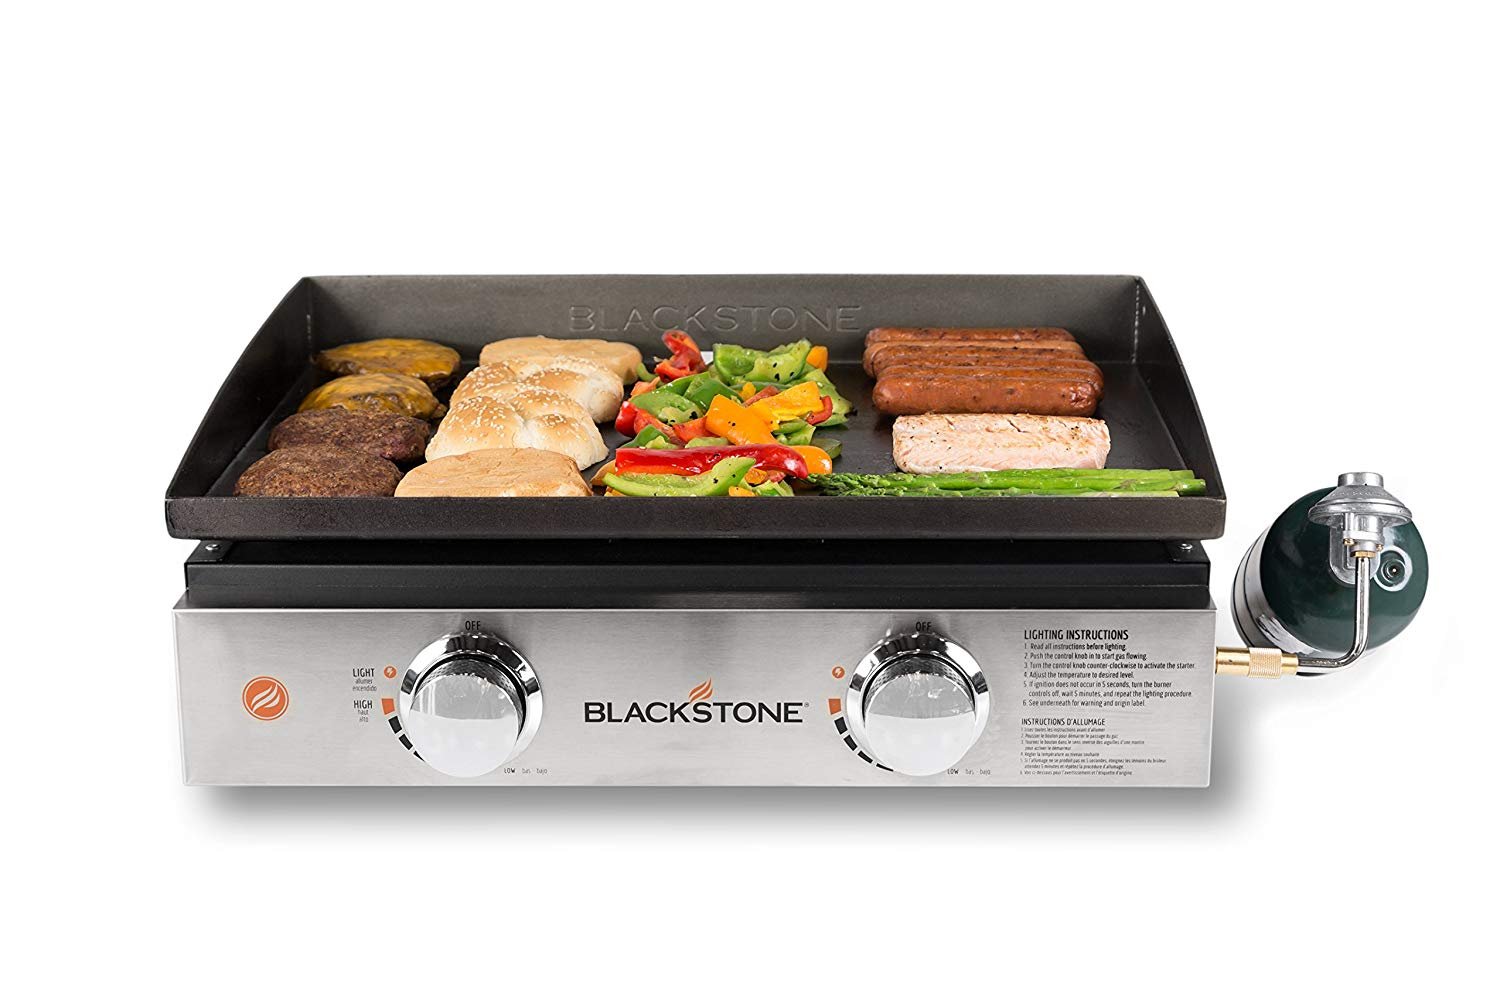 Blackstone 1666 22" Tabletop Griddle Outdoor Grill, 22 inch, Black - image 3 of 8